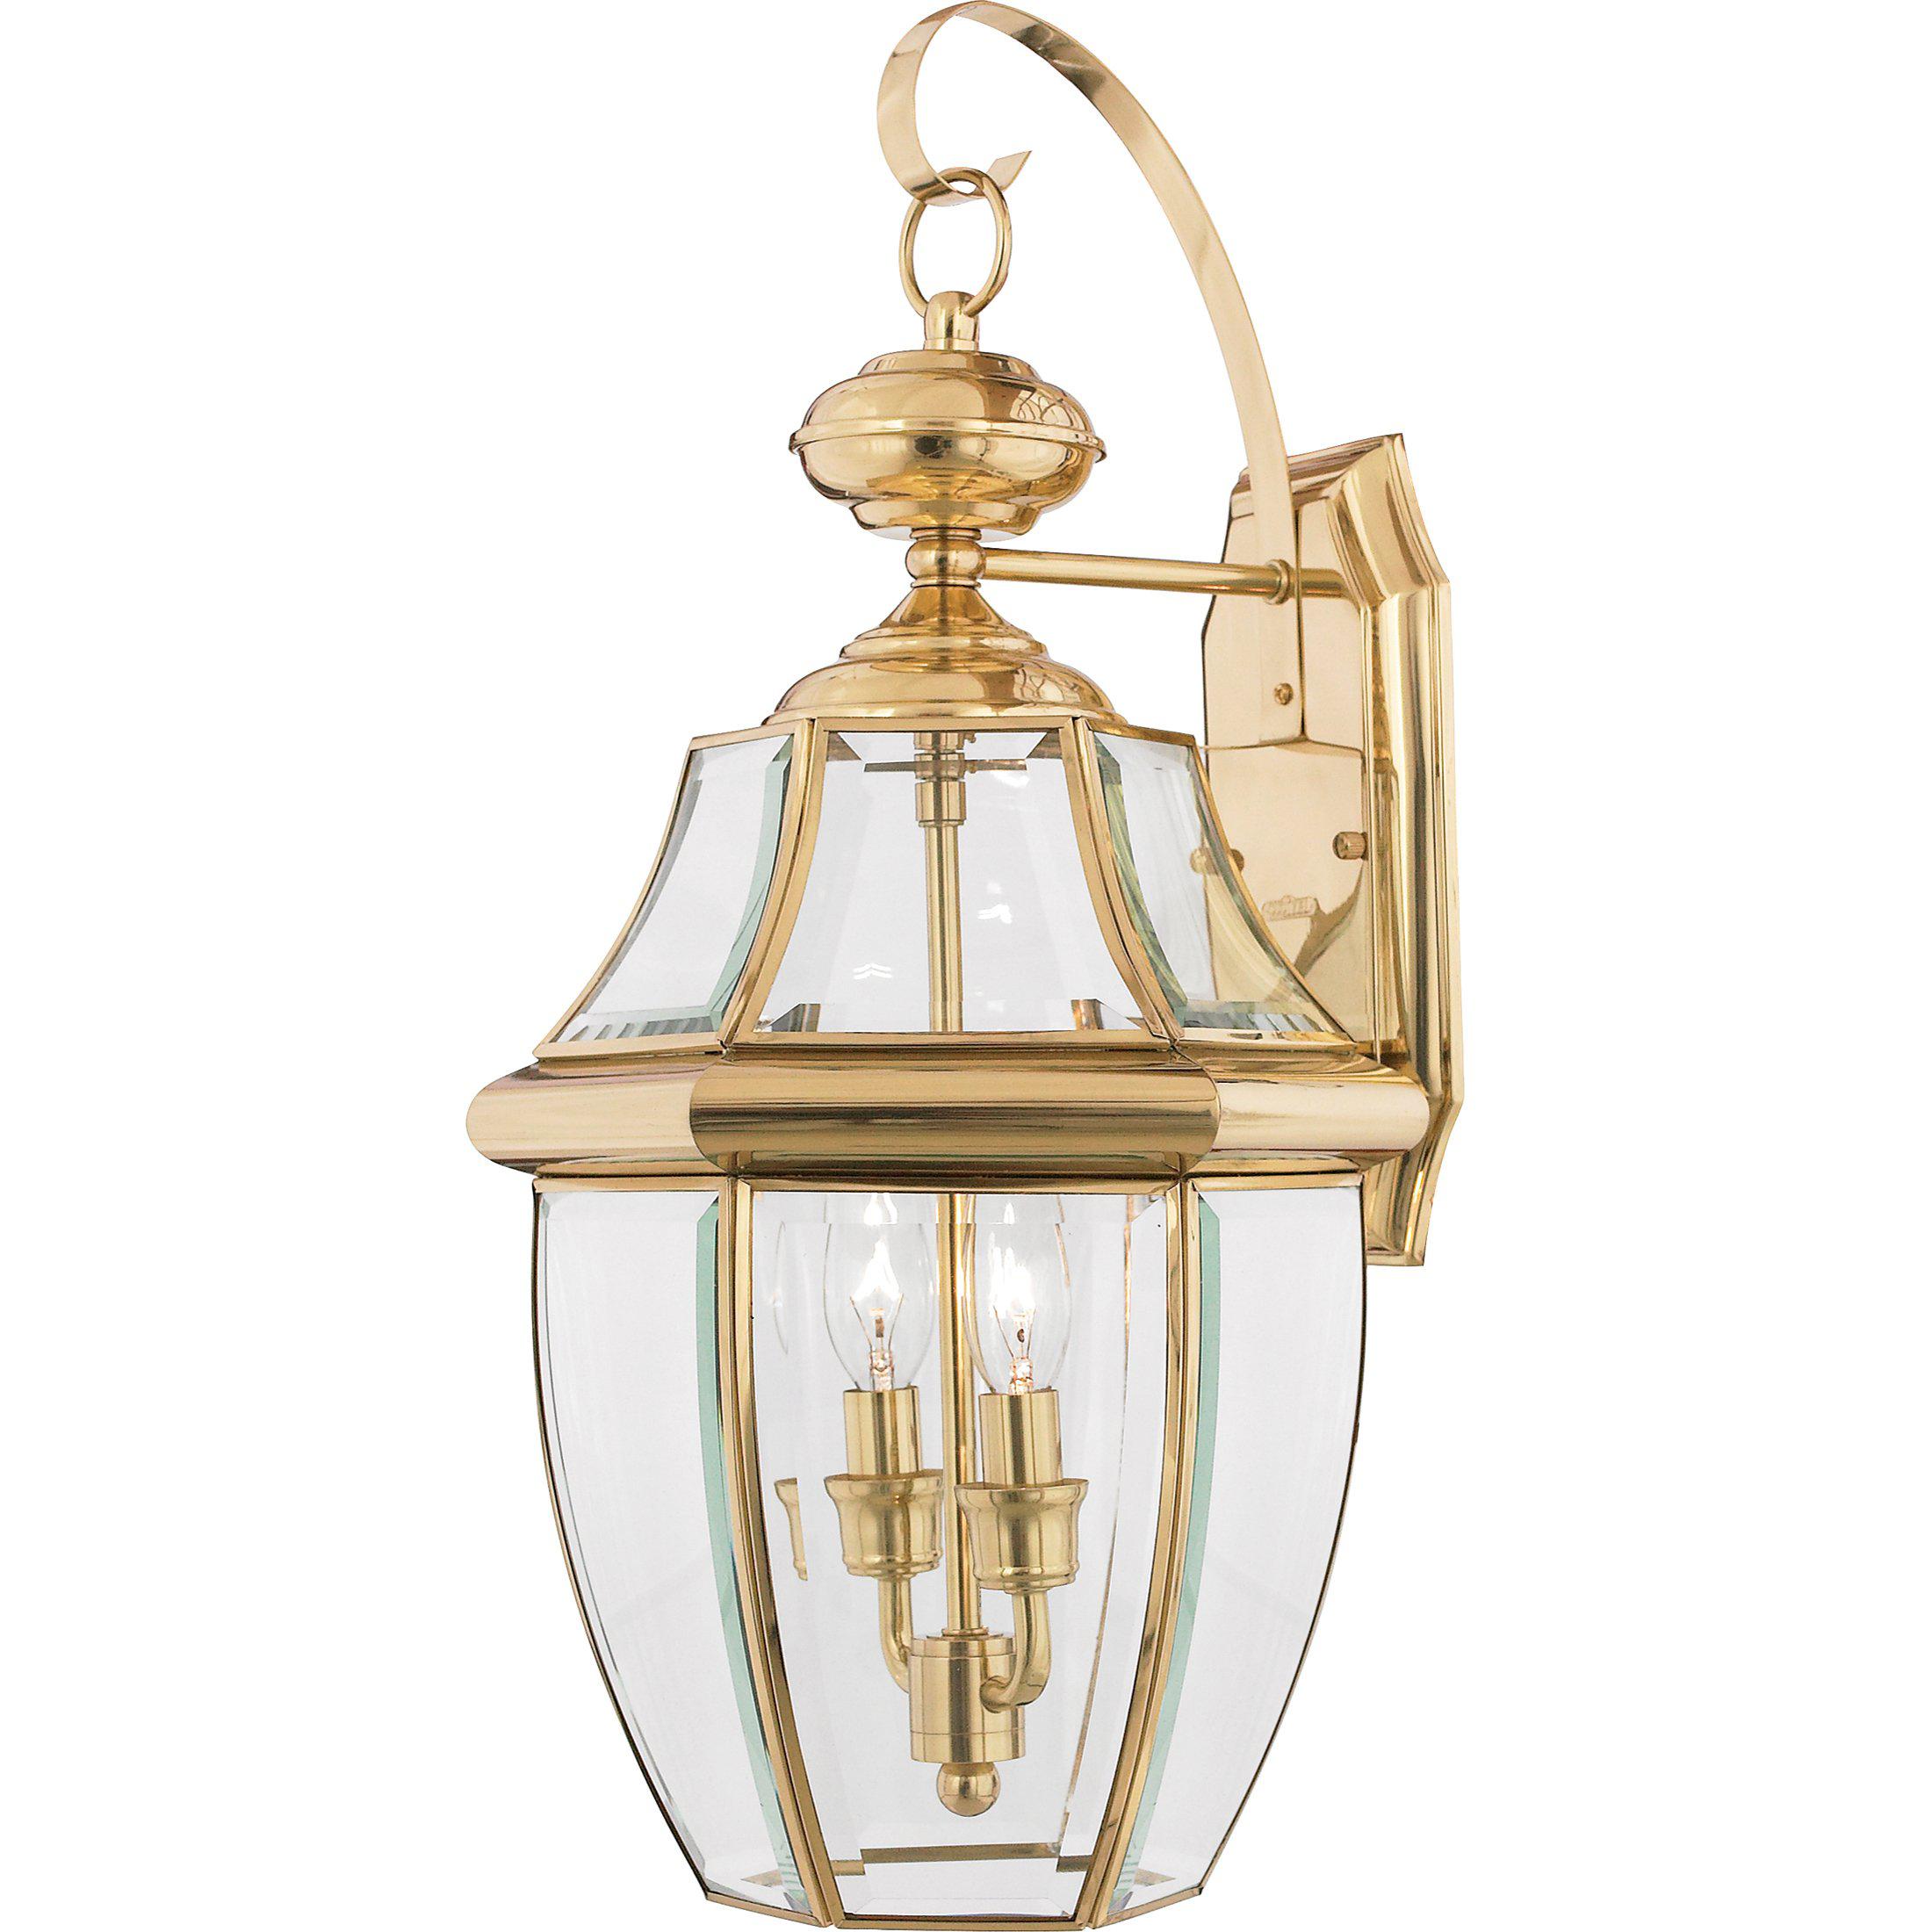 Quoizel  Newbury Outdoor Lantern, Large Outdoor l Wall Quoizel Polished Brass  